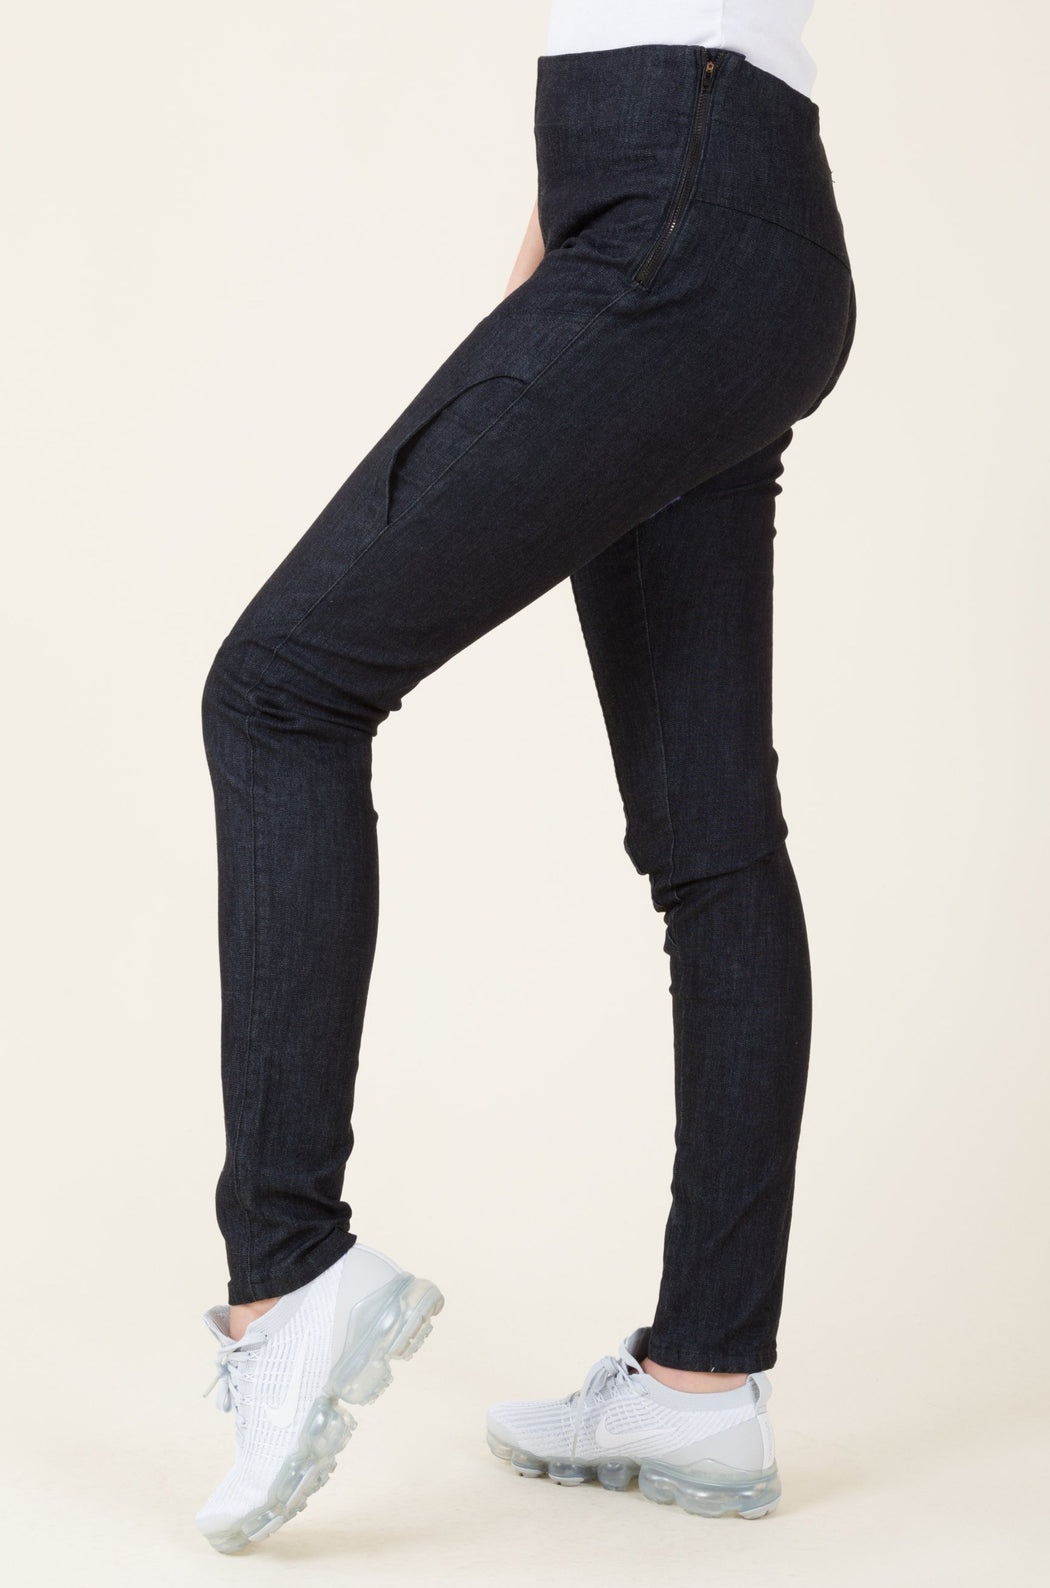 A mid-rise, skinny legged denim legging (or jegging), with elliptical pockets on the thigh and a long inseam.